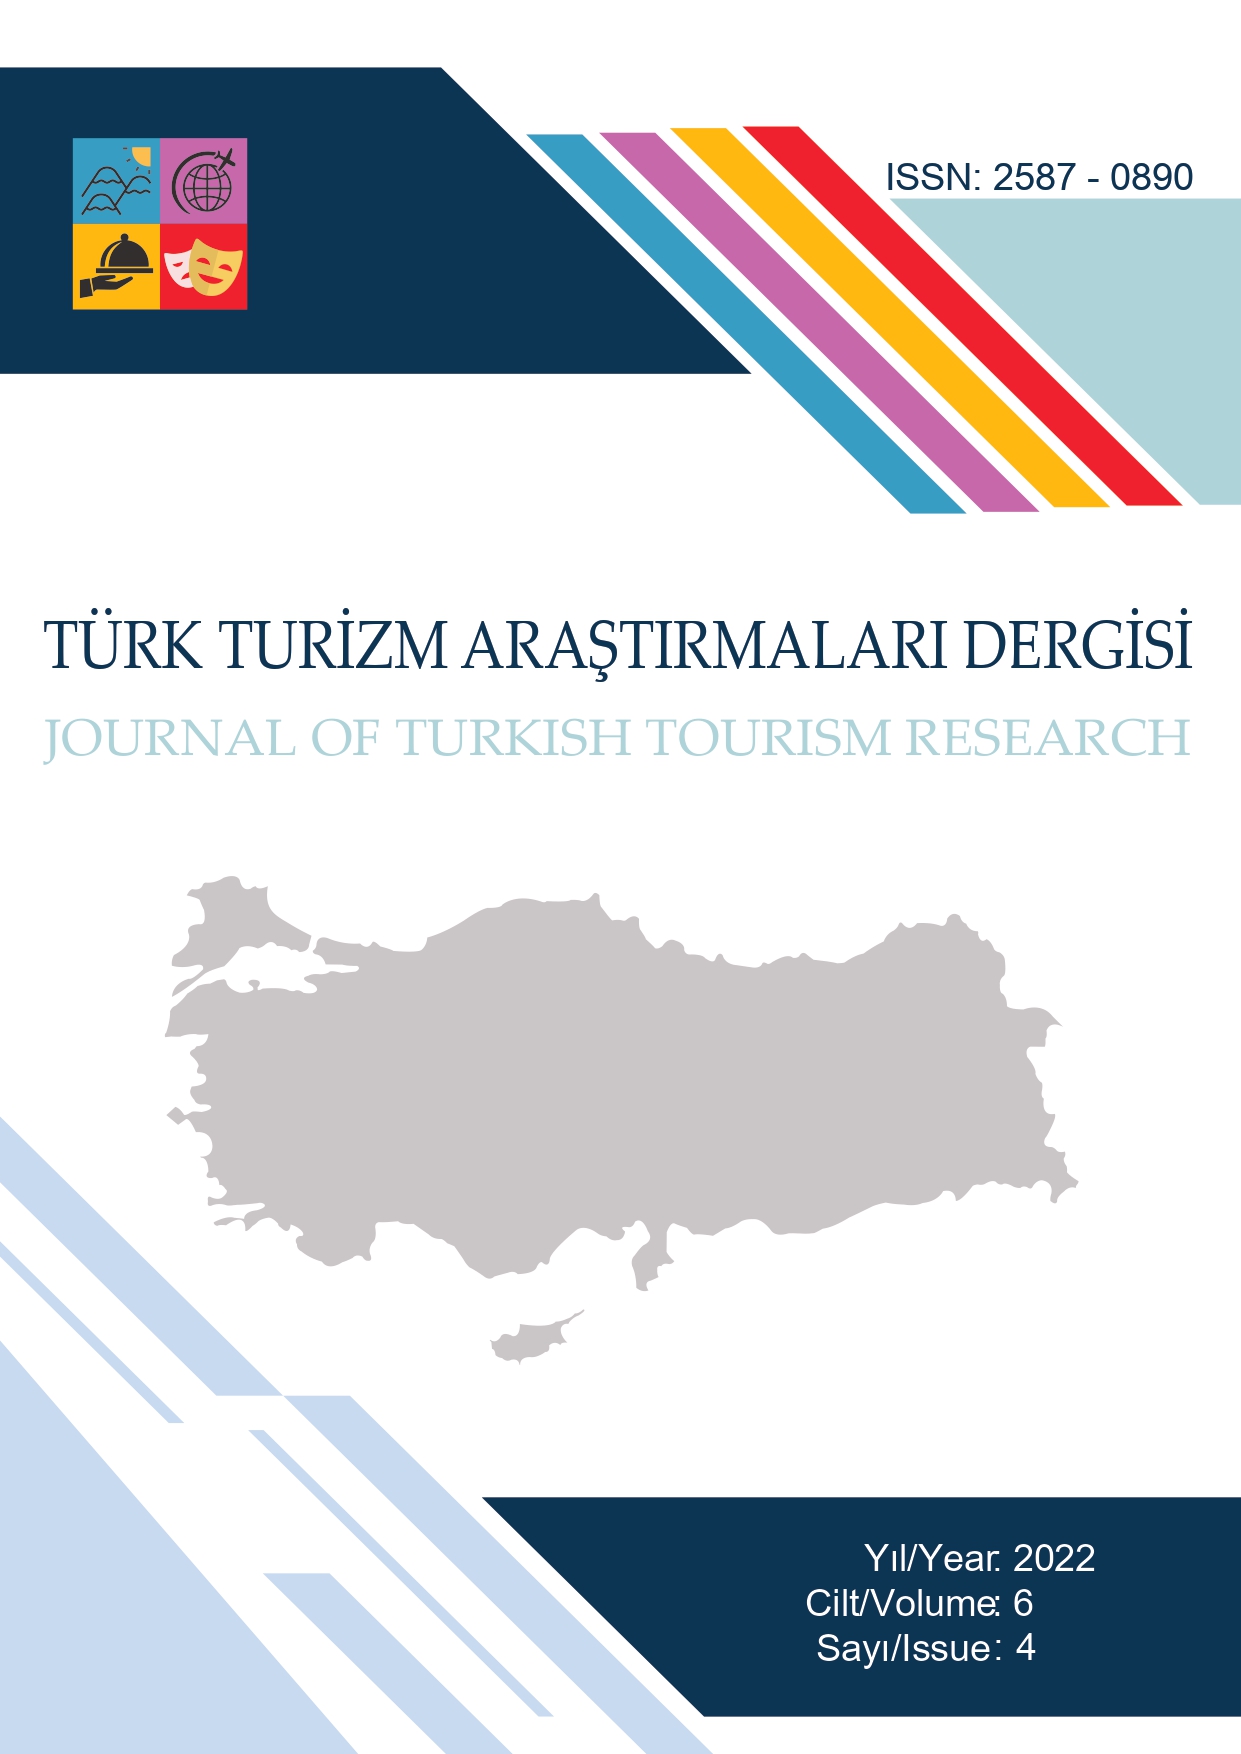 Gender in Tourism Literature: Bibliometric Analysis of Postgraduate Theses in Turkey Cover Image